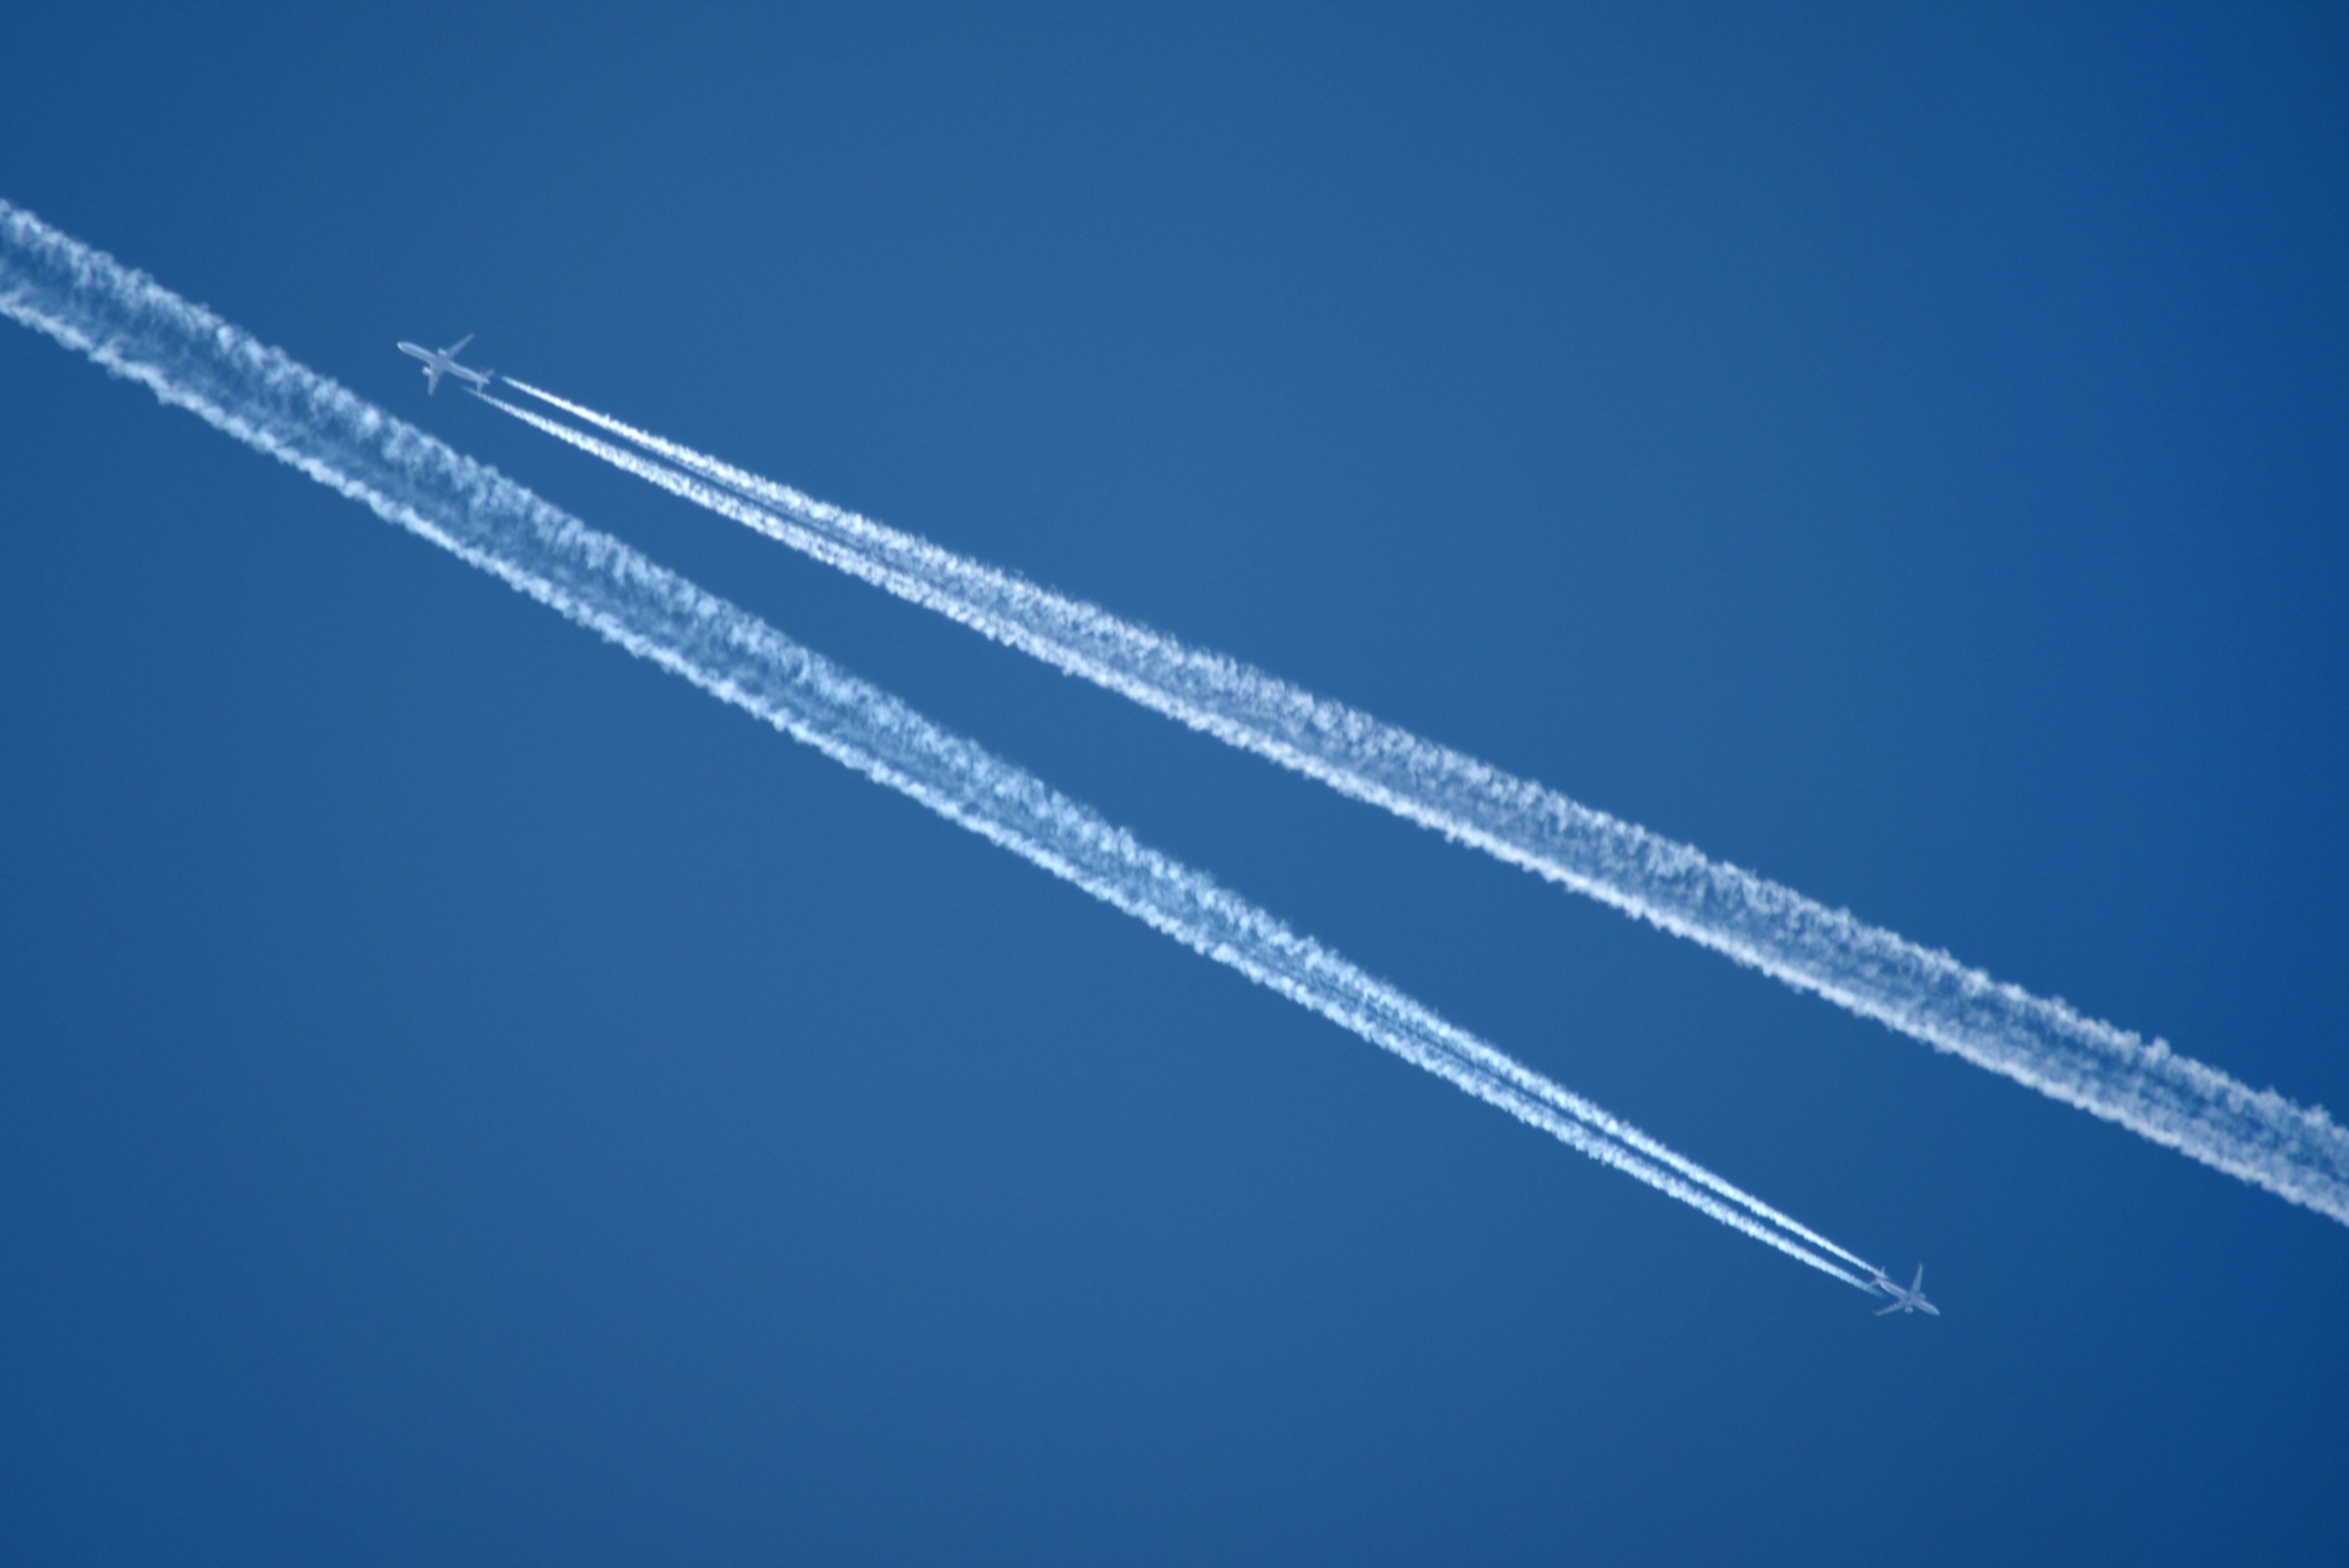 Contrails in the sky of two planes that passed each other in cruise.